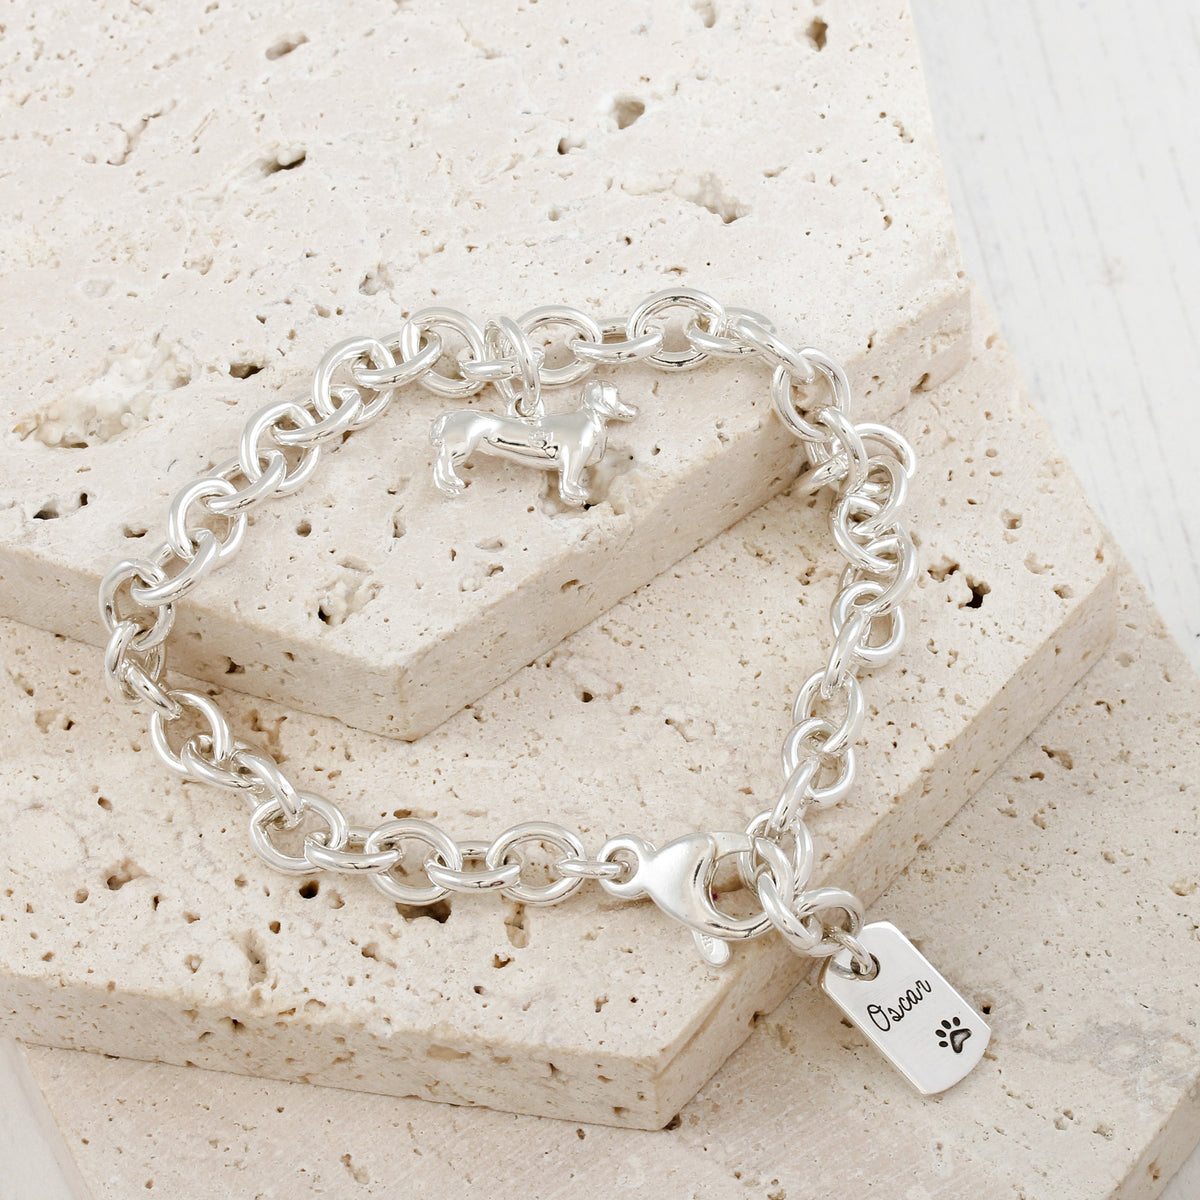 sausage dog silver charm bracelet with engraved name tag